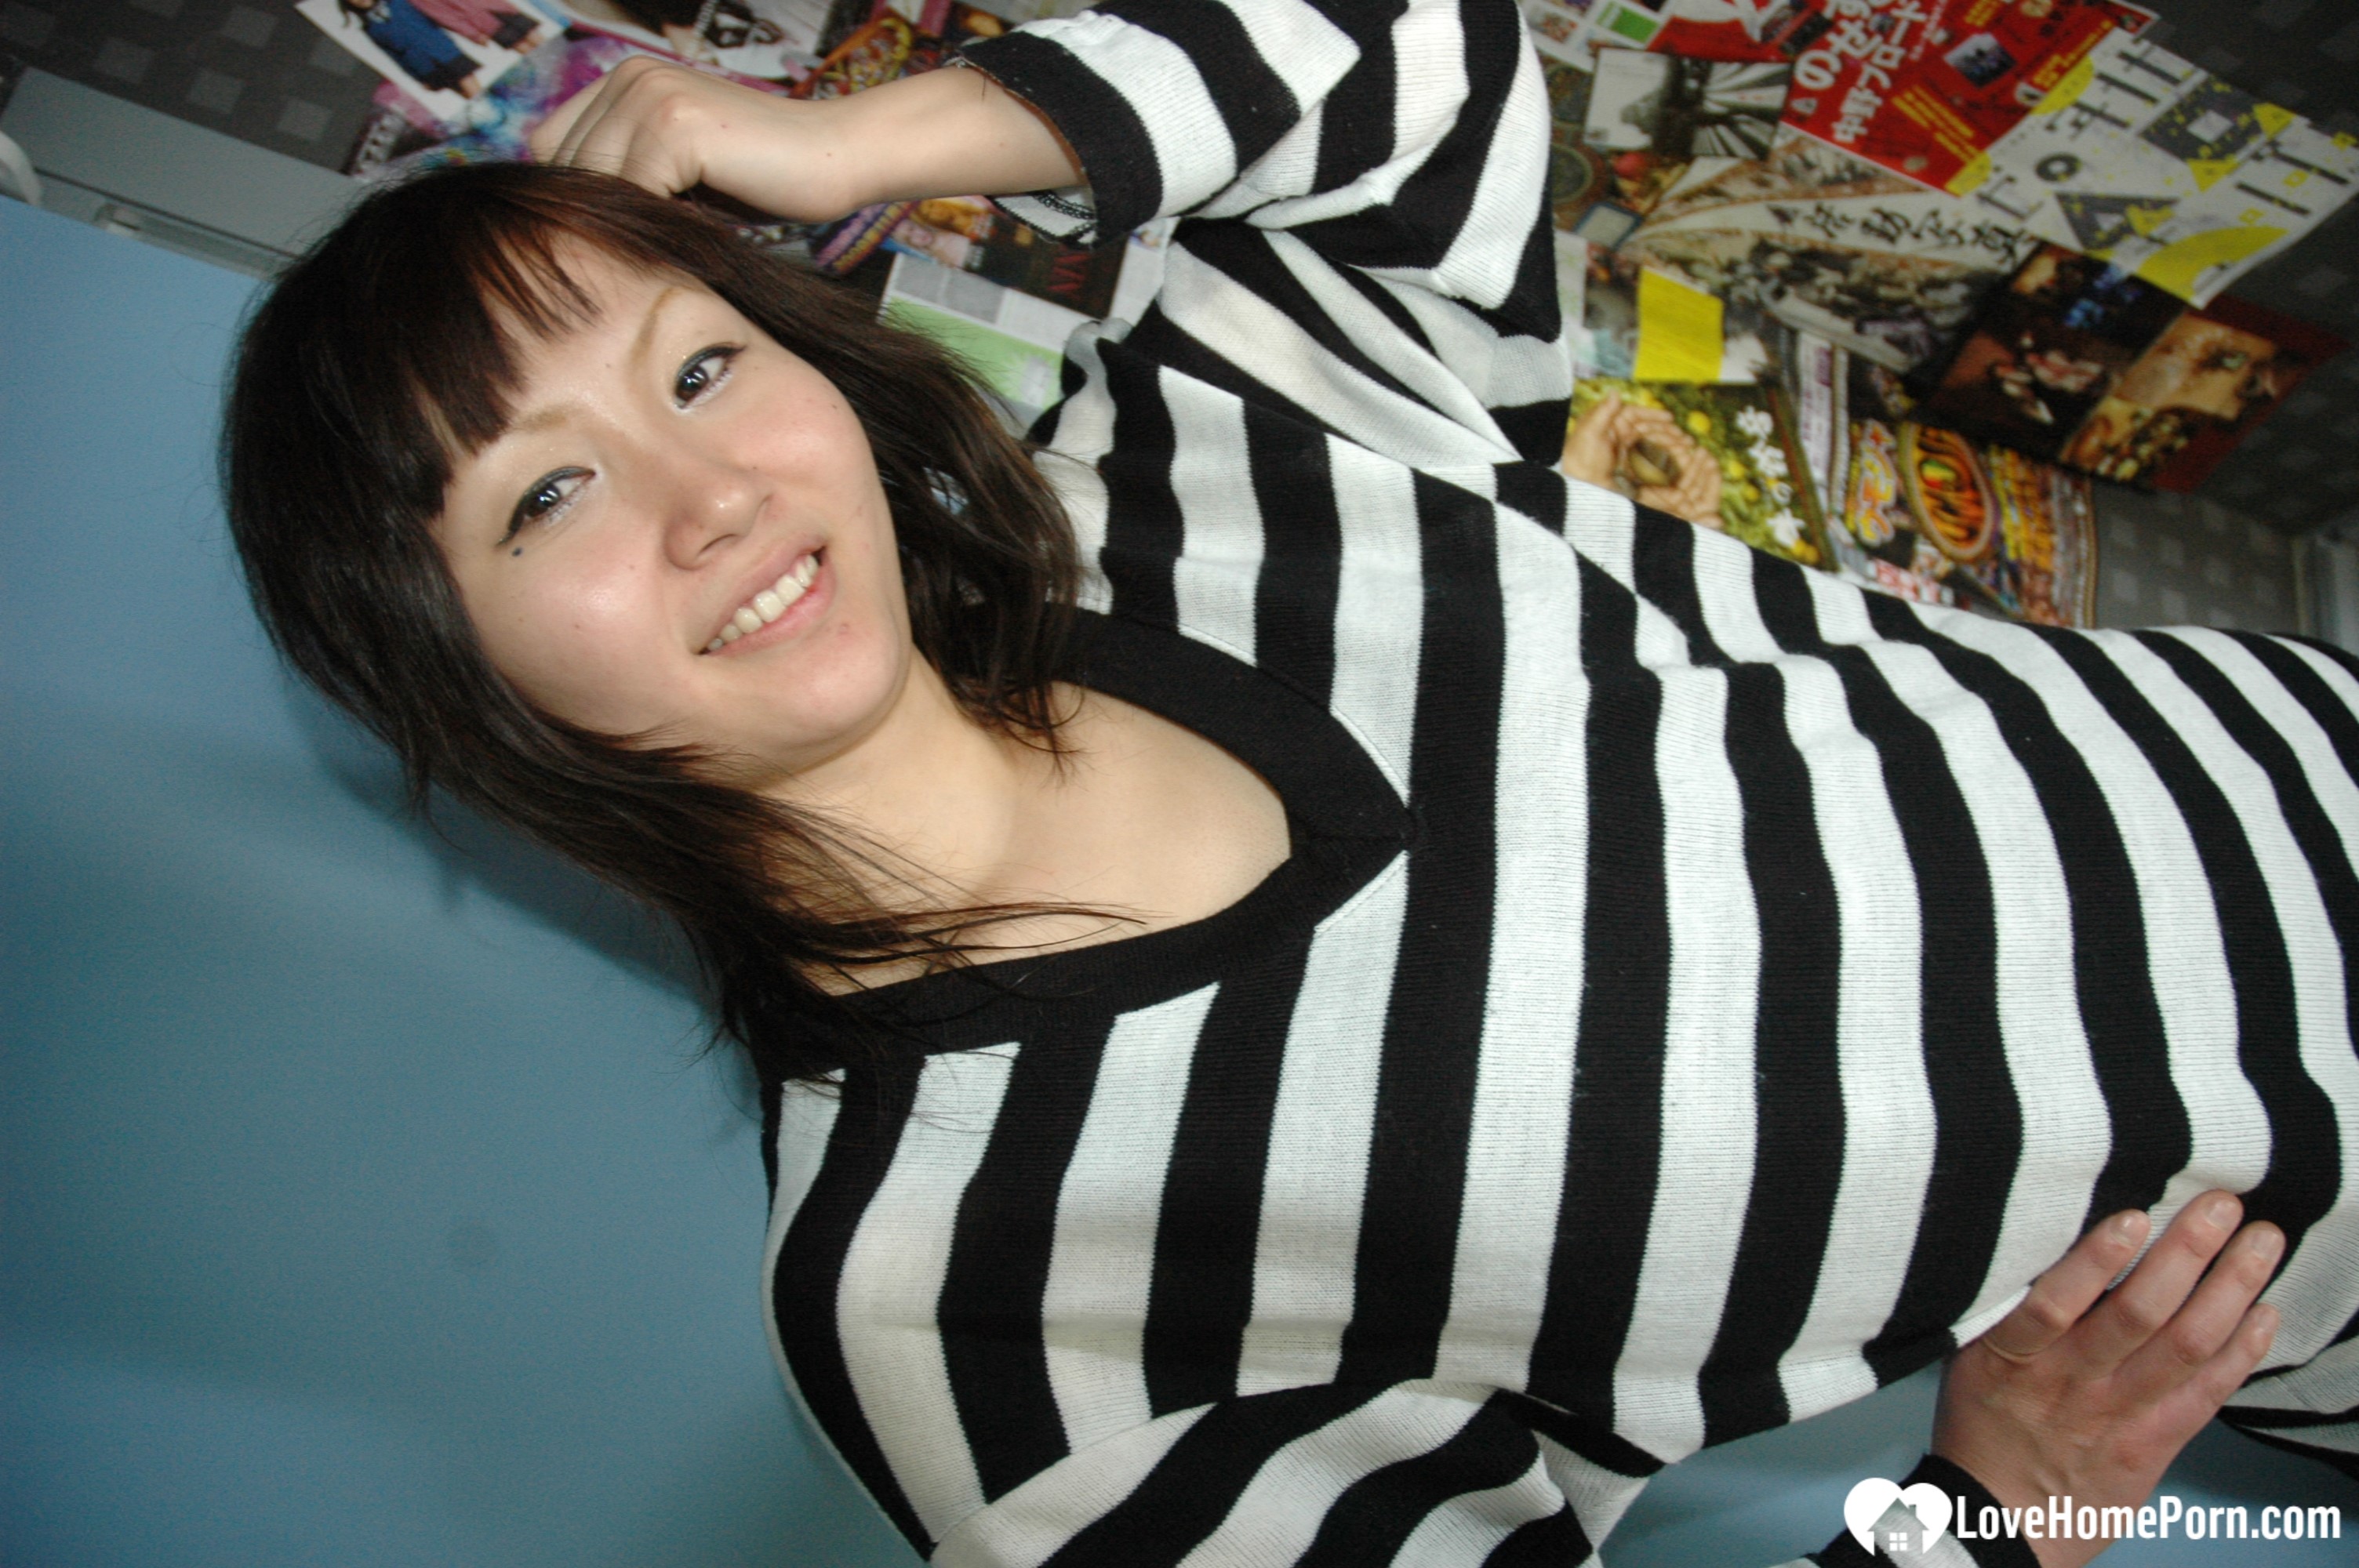 Hot Asian strips pantyhose and does sexy poses